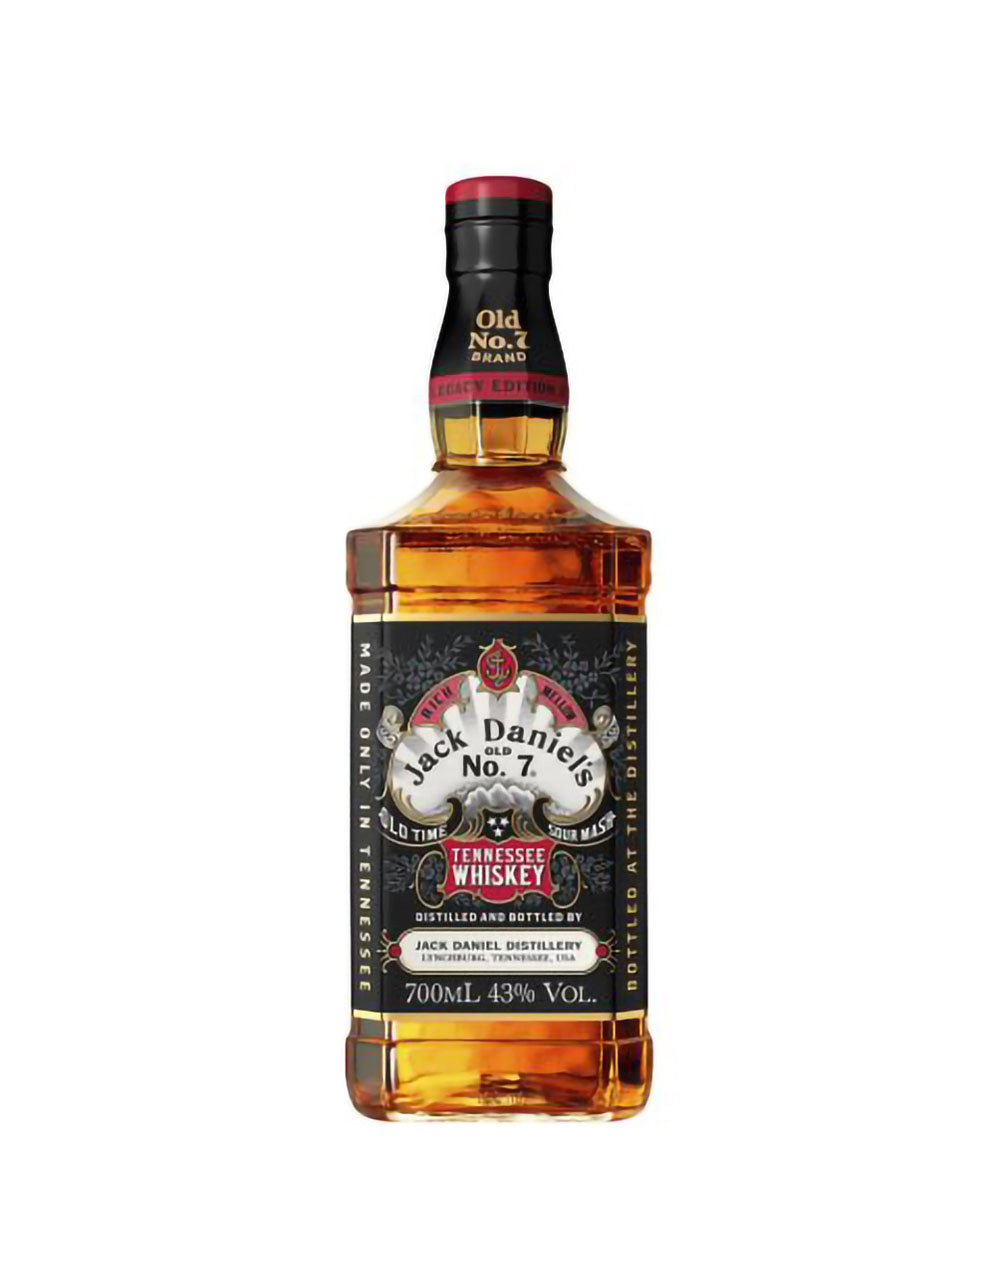 Jack Daniel's Legacy Edition 2 Tennessee Whiskey